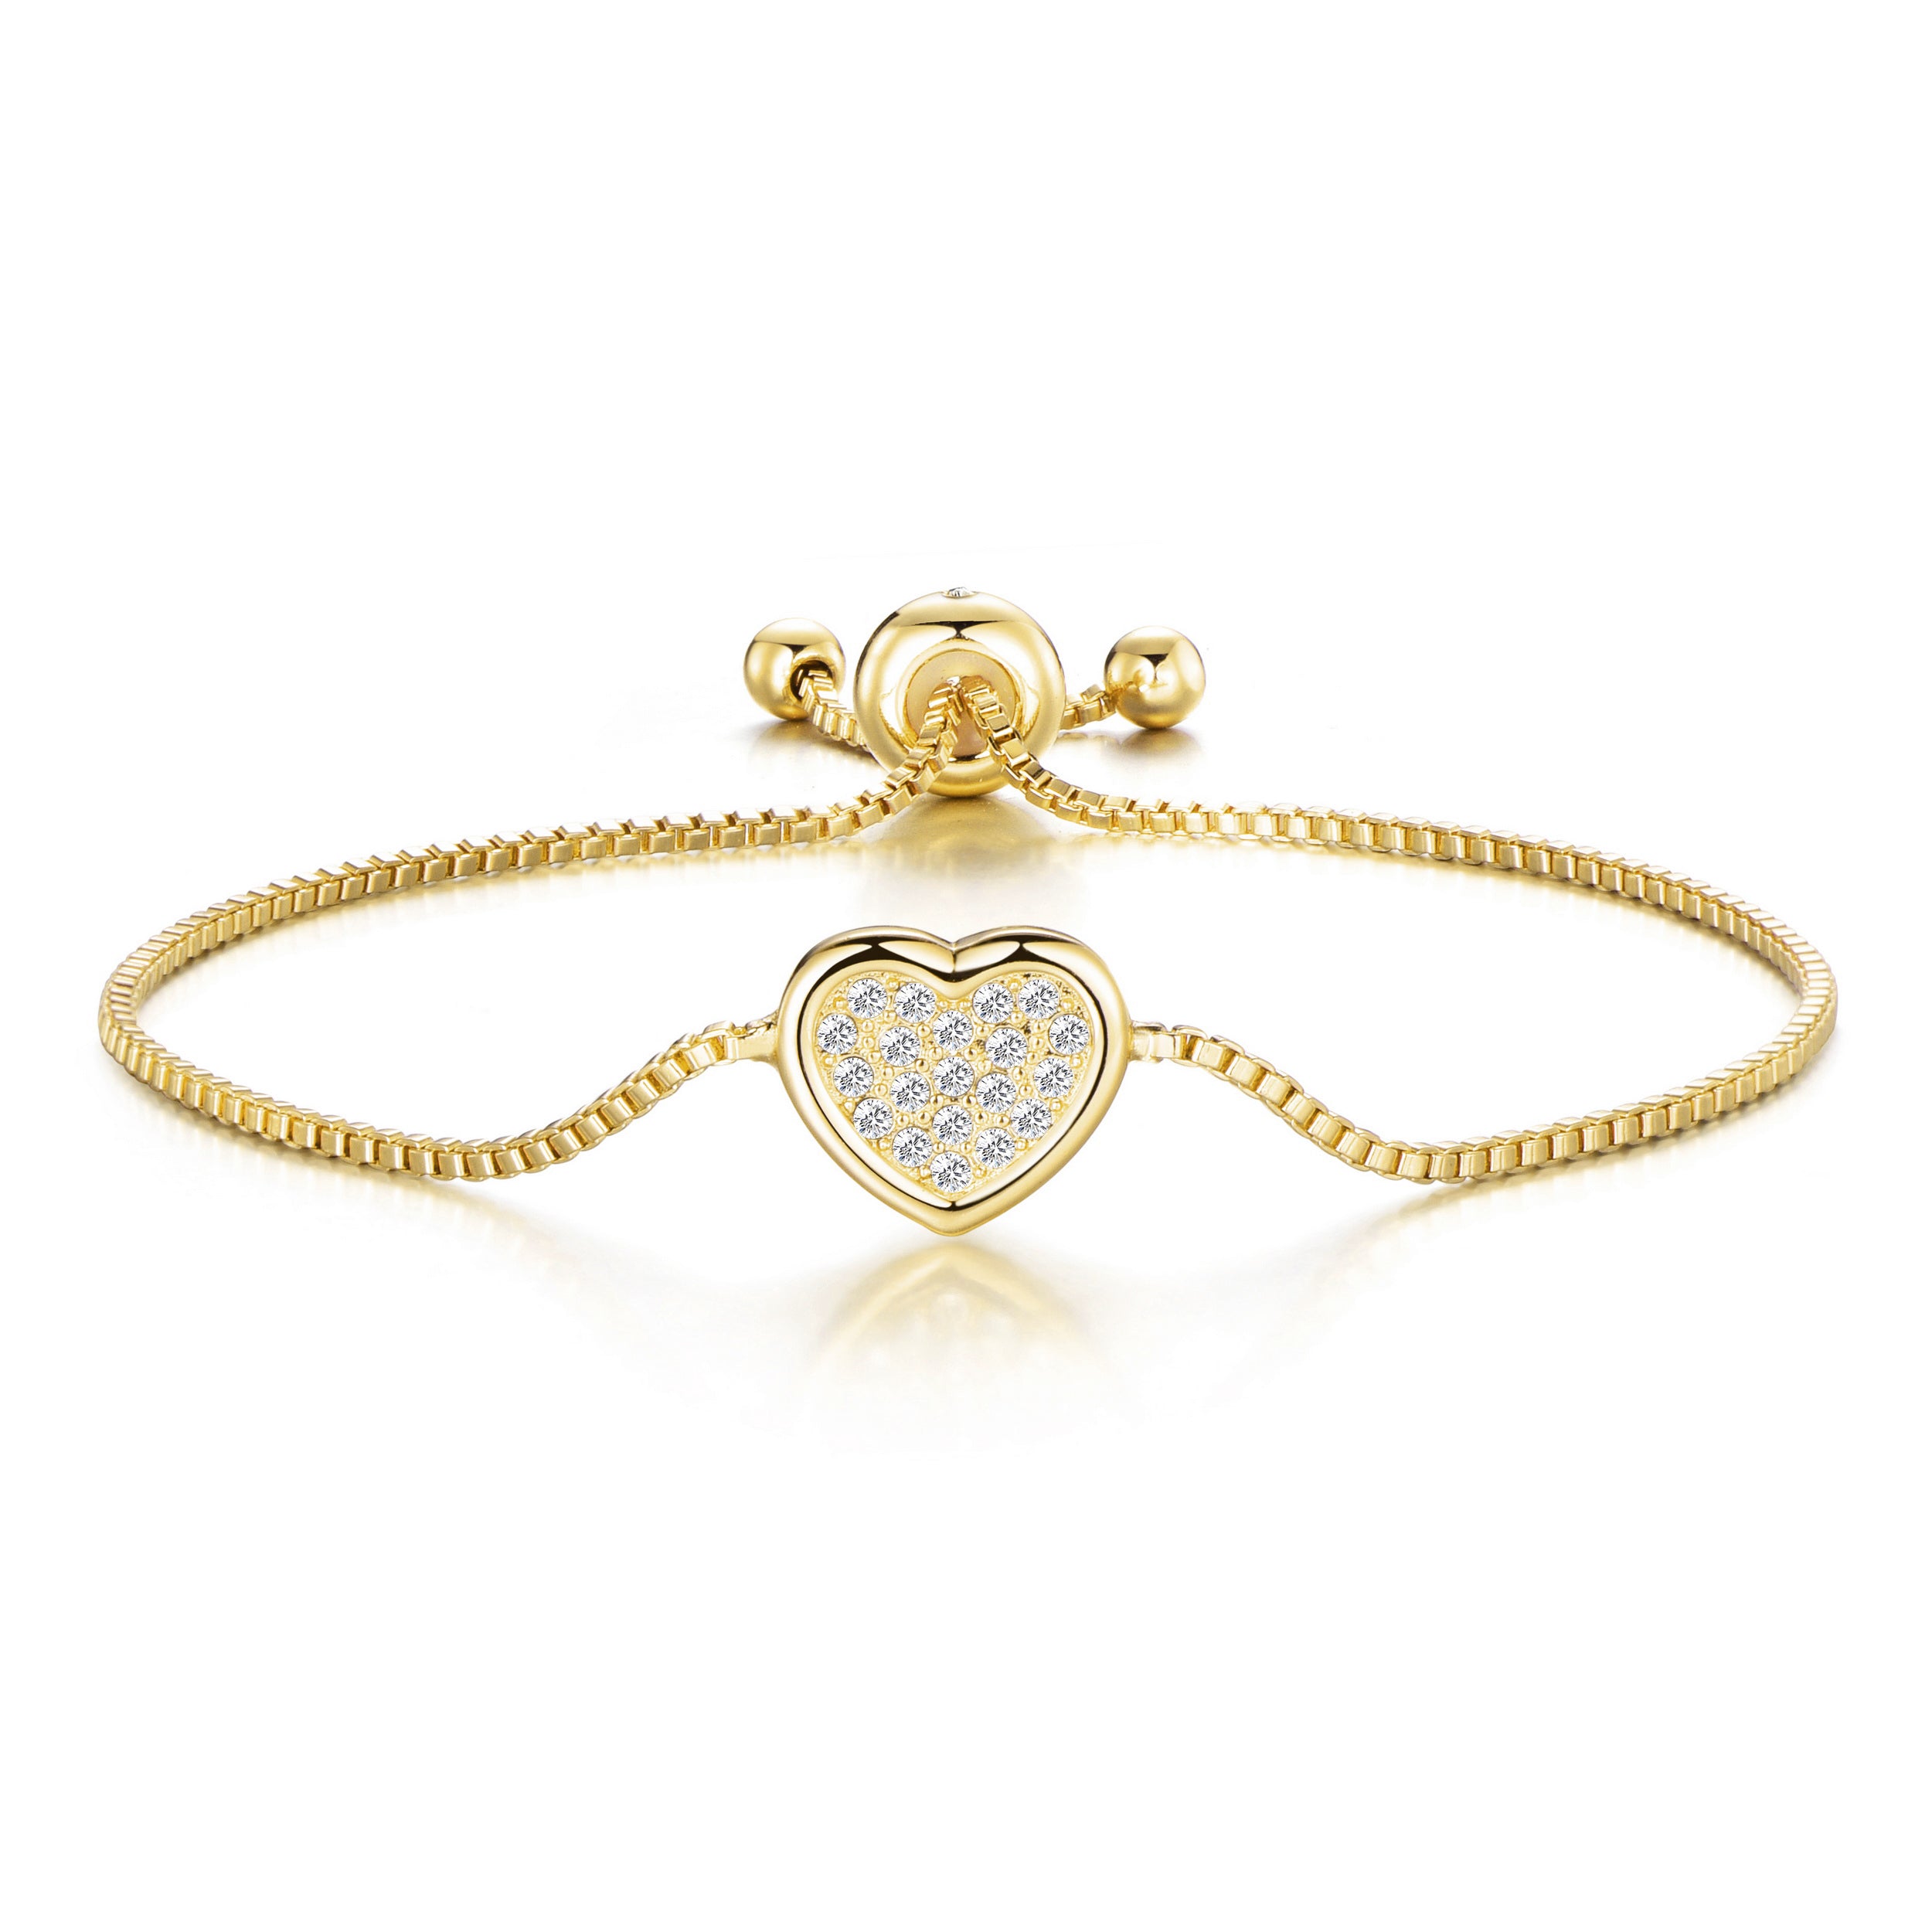 Gold Plated Pave Heart Friendship Bracelet Created with Zircondia® Crystals by Philip Jones Jewellery